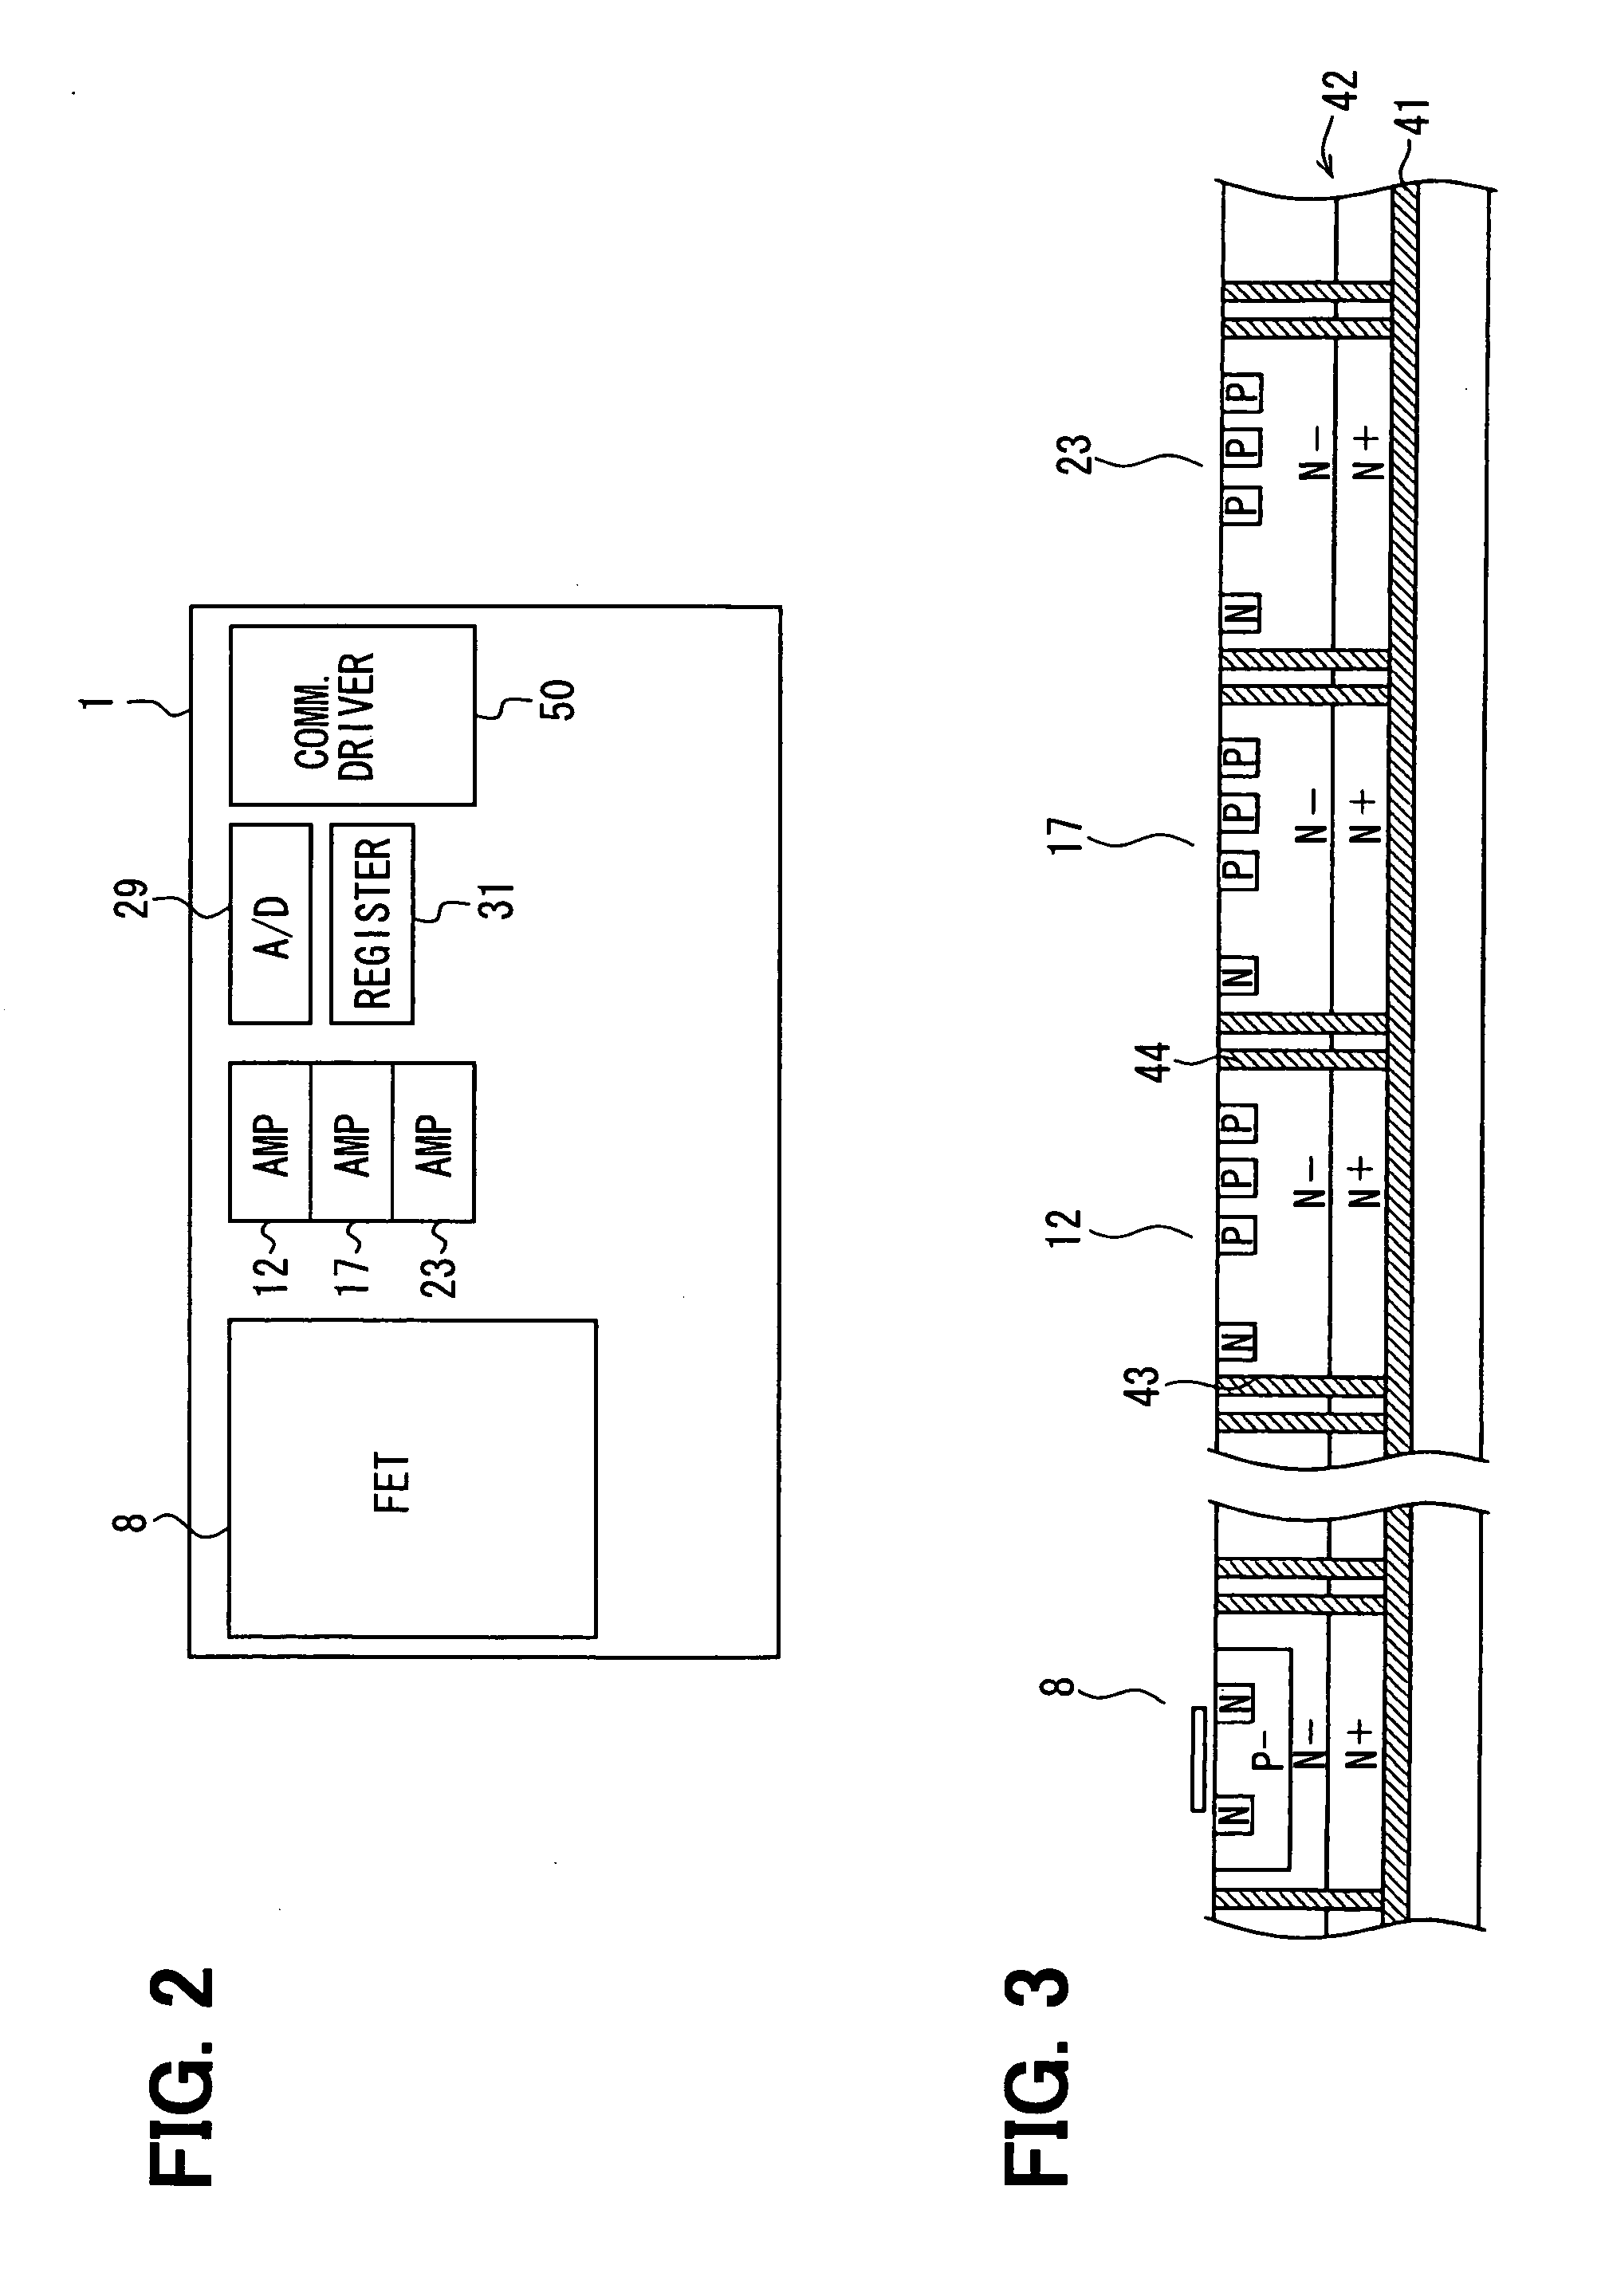 Signal detecting device and method for inductive load